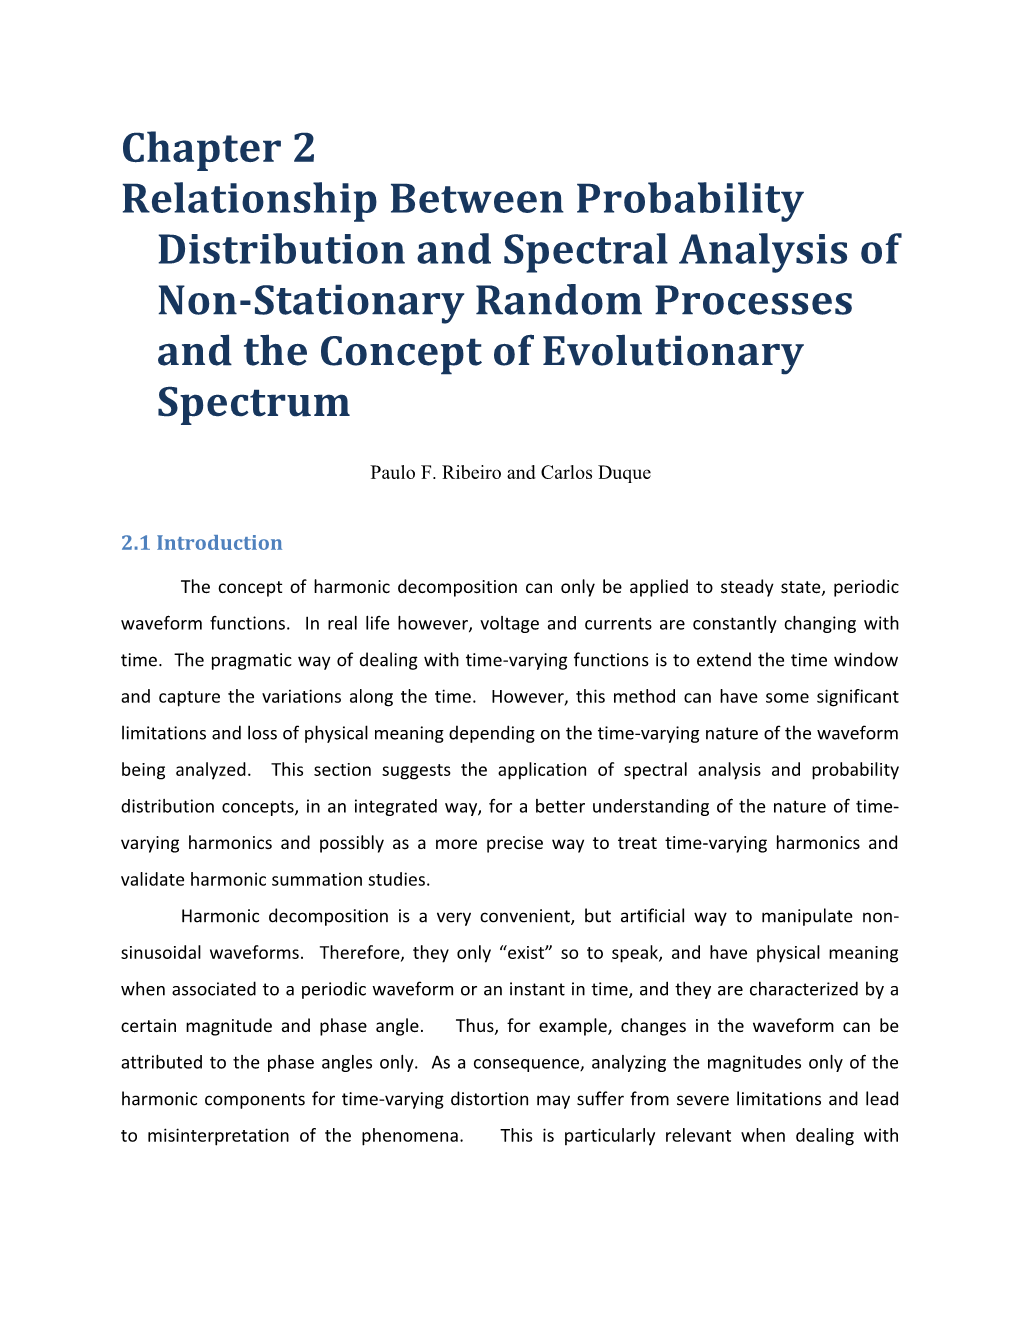 Relationship Between Probability Distribution and Spectral Analysis of Non-Stationary Random